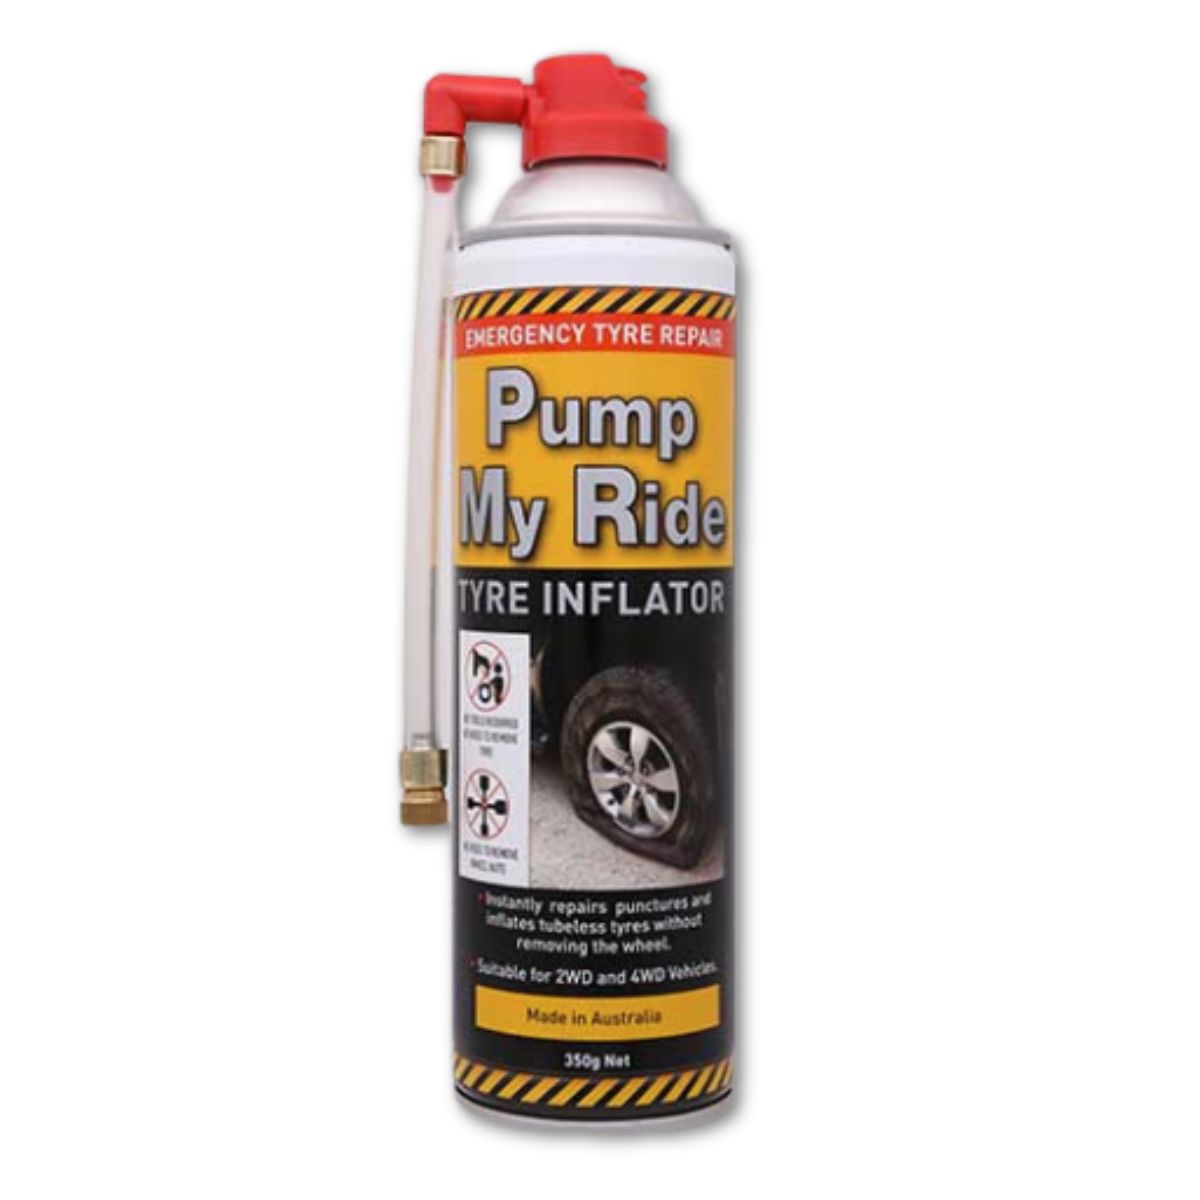 PMR Pump My Ride 350gm - South East Clearance Centre